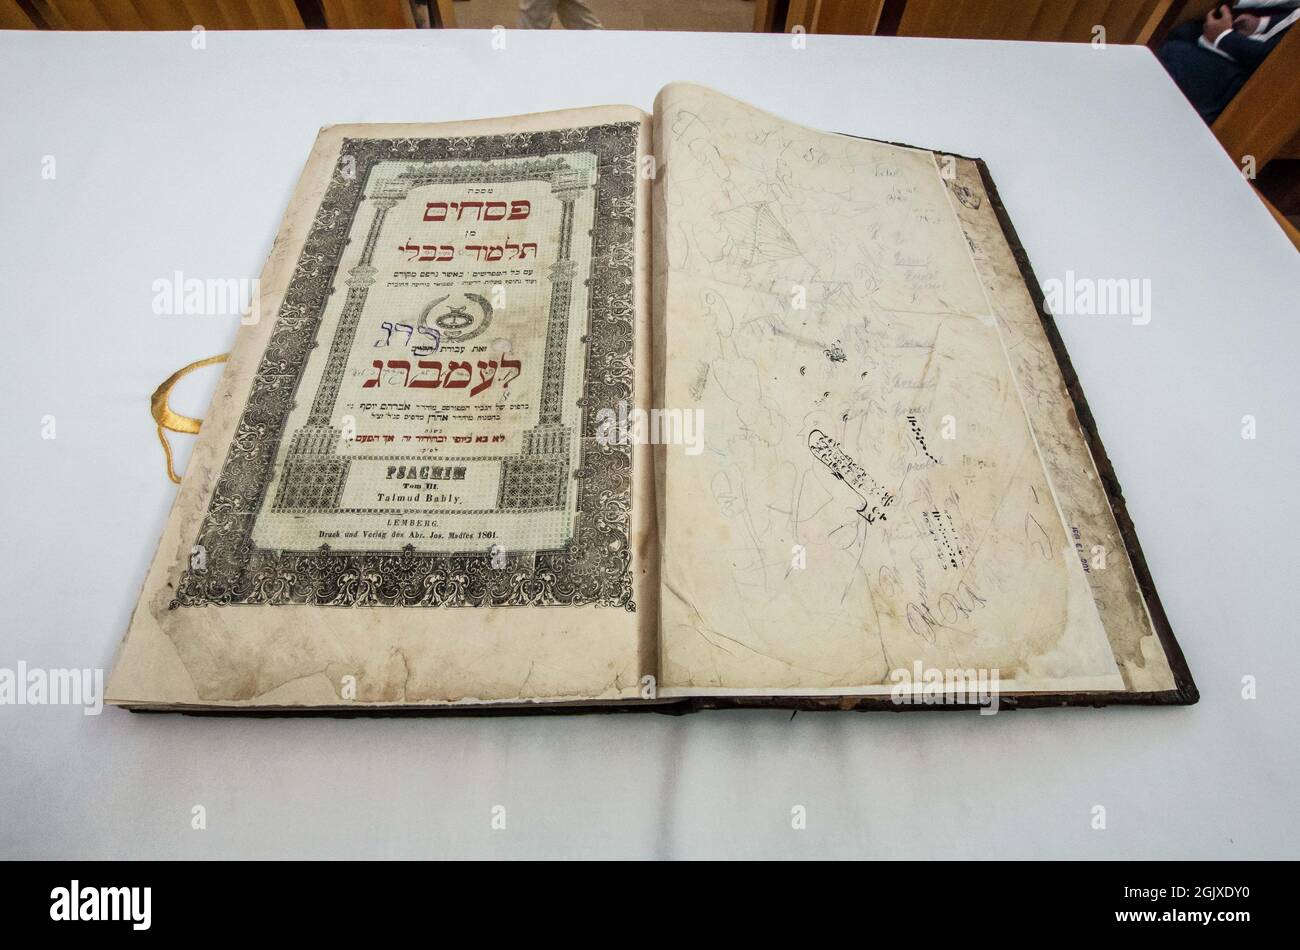 September 10, 2021, Munich, Bavaria, Germany: A restored 1861 Talmud was presented by the Rotary Club of Munich-Mitte to the Israelische Kultusgemeinde (Israeli Cultural Community).  The Talmud originated from Lemberg (today Lviv, Ukraine) and was painstakingly restored over six months by Andrea Fellinger of the Buch Werkstatt in Munich. On hand were Prof. Dr. Rainer Schmidt, Dr. Reinhard Busch, Dr. h.c. Charlotte Knobloch, Rabbiner Shmuel Aharon Brodman. (Credit Image: © Sachelle Babbar/ZUMA Press Wire) Stock Photo